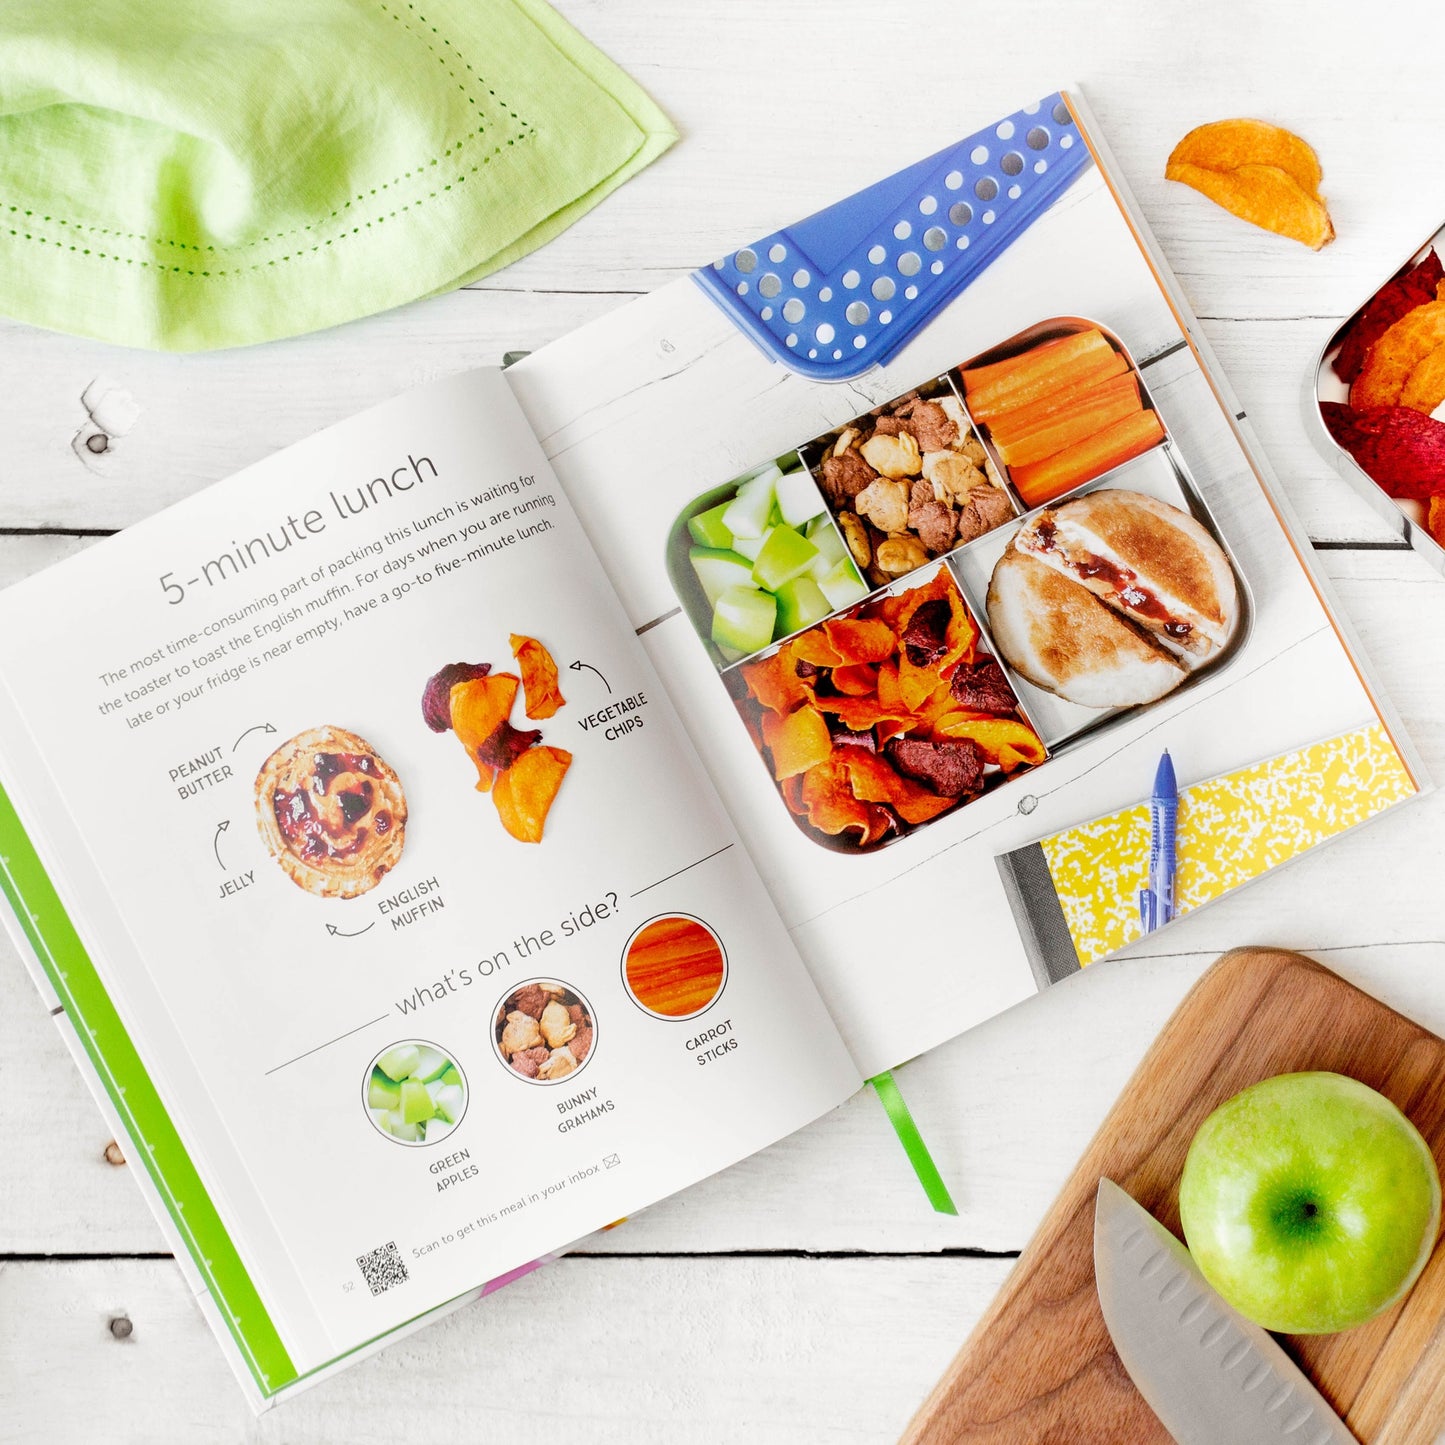 These @Simple Modern lunchboxes are SO cute!!! Check out all 4